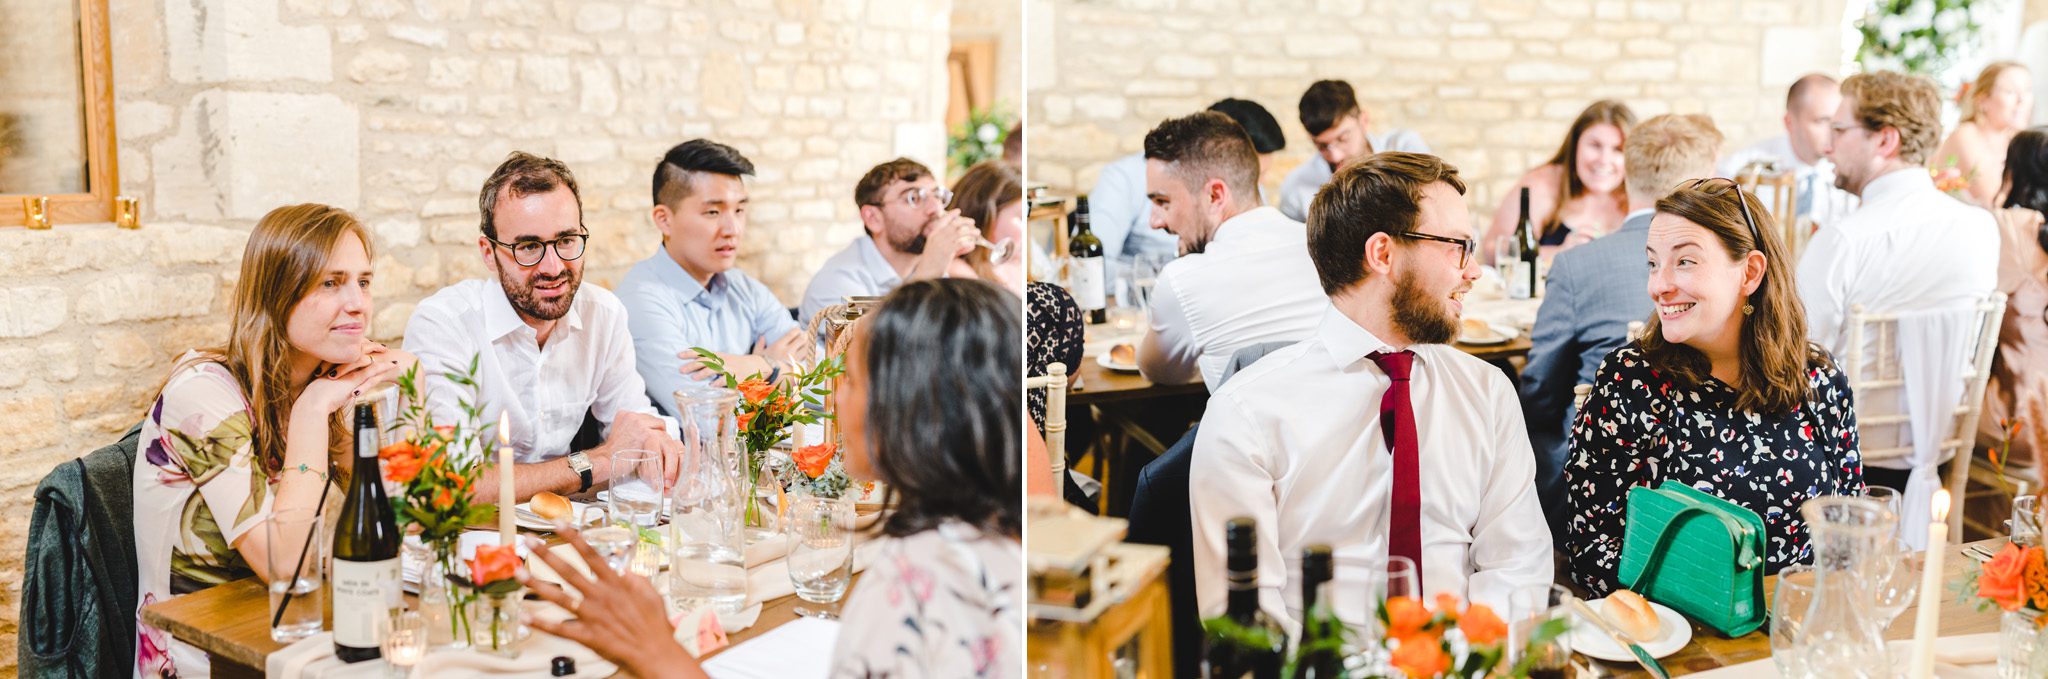 guests at upcote barn for the wedding breakfast